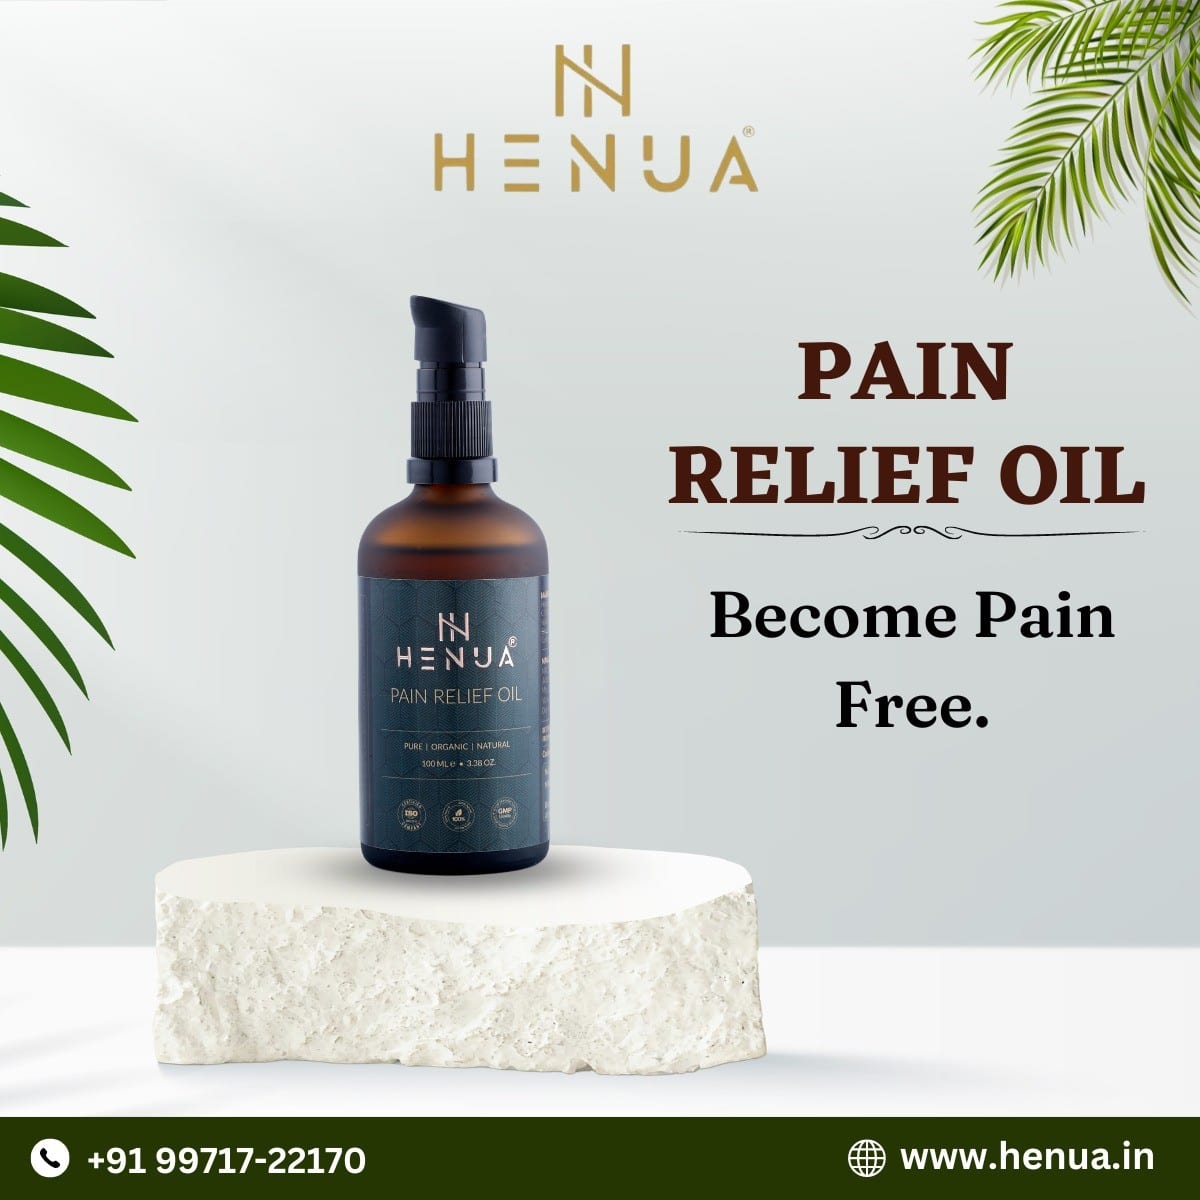 Be-Pain-Free-With-Henua-Pain-Relief-Oil-Ayurvedic-Oil